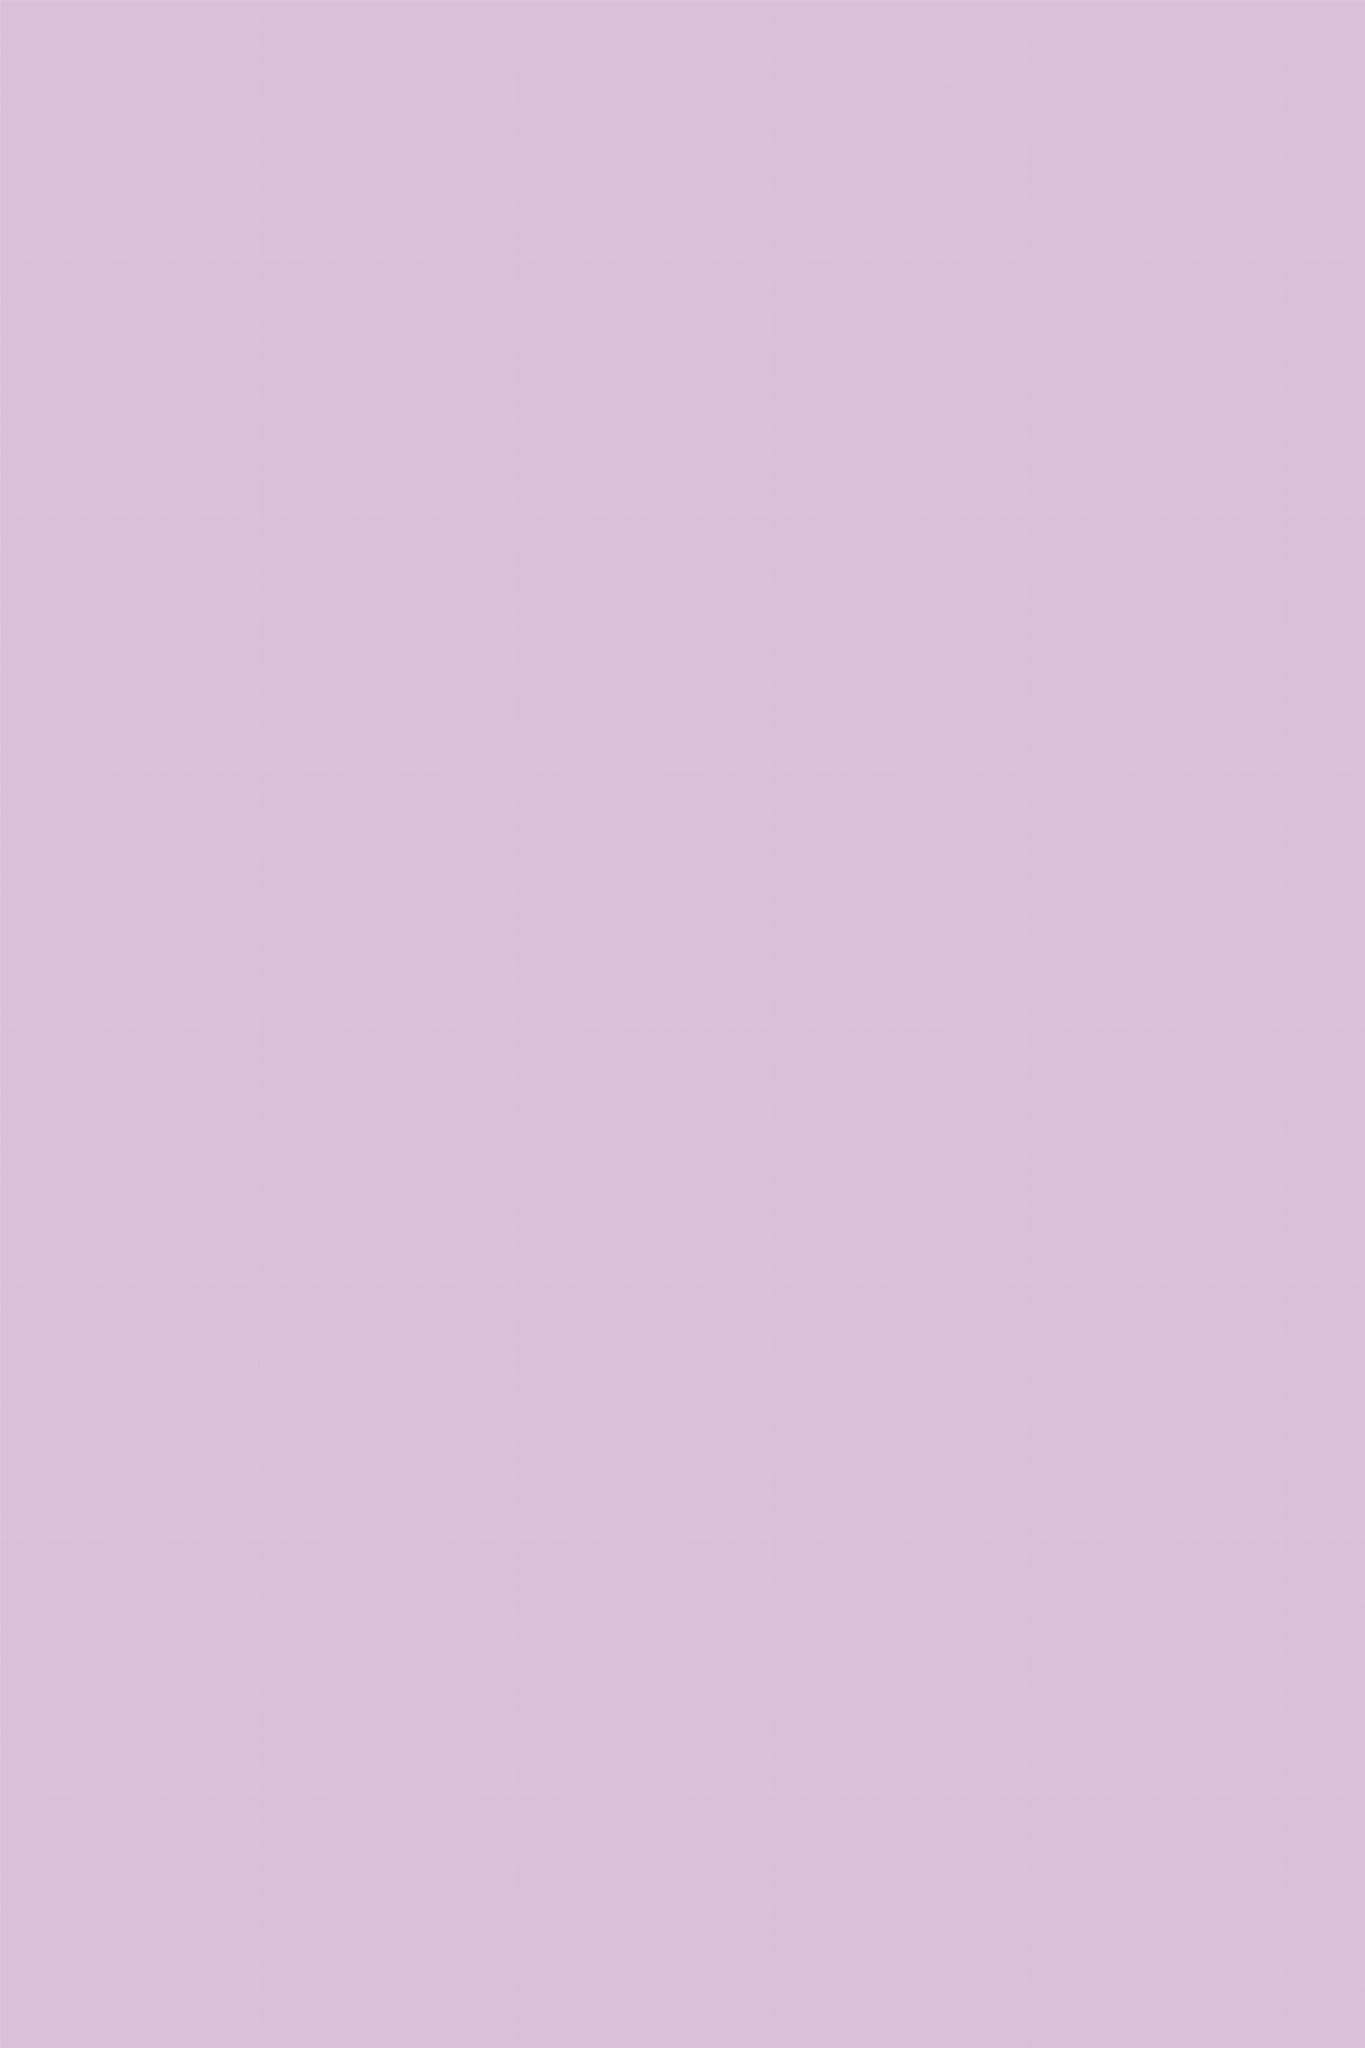 Pastel Aesthetic Lilac Solid Color Wallpaper And Stick Or Non Pasted